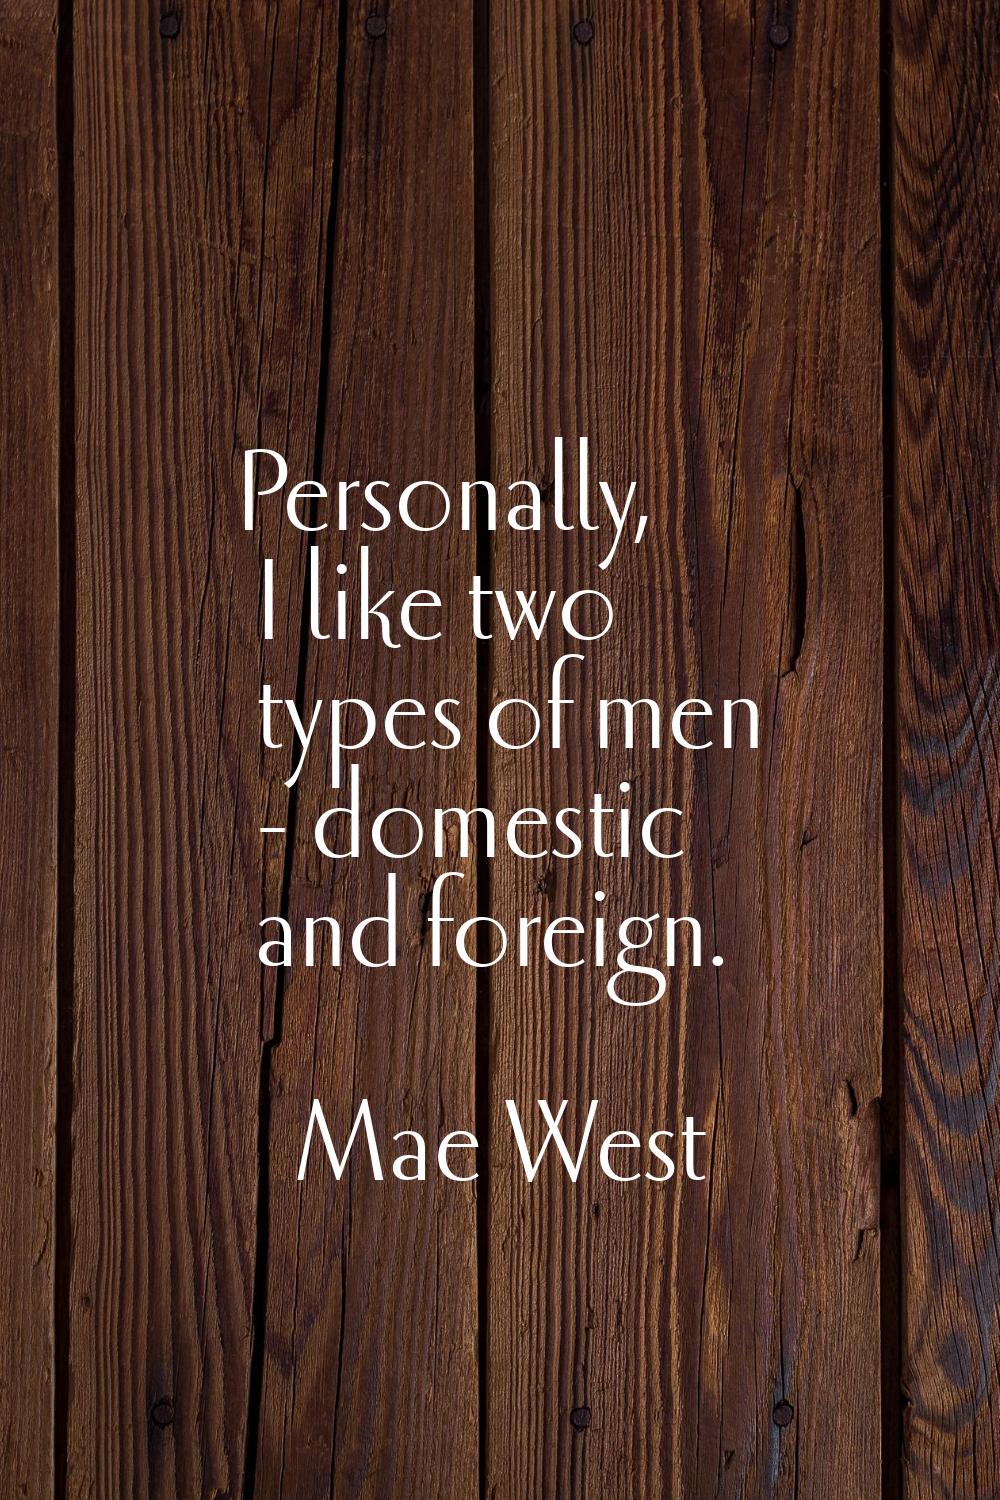 Personally, I like two types of men - domestic and foreign.